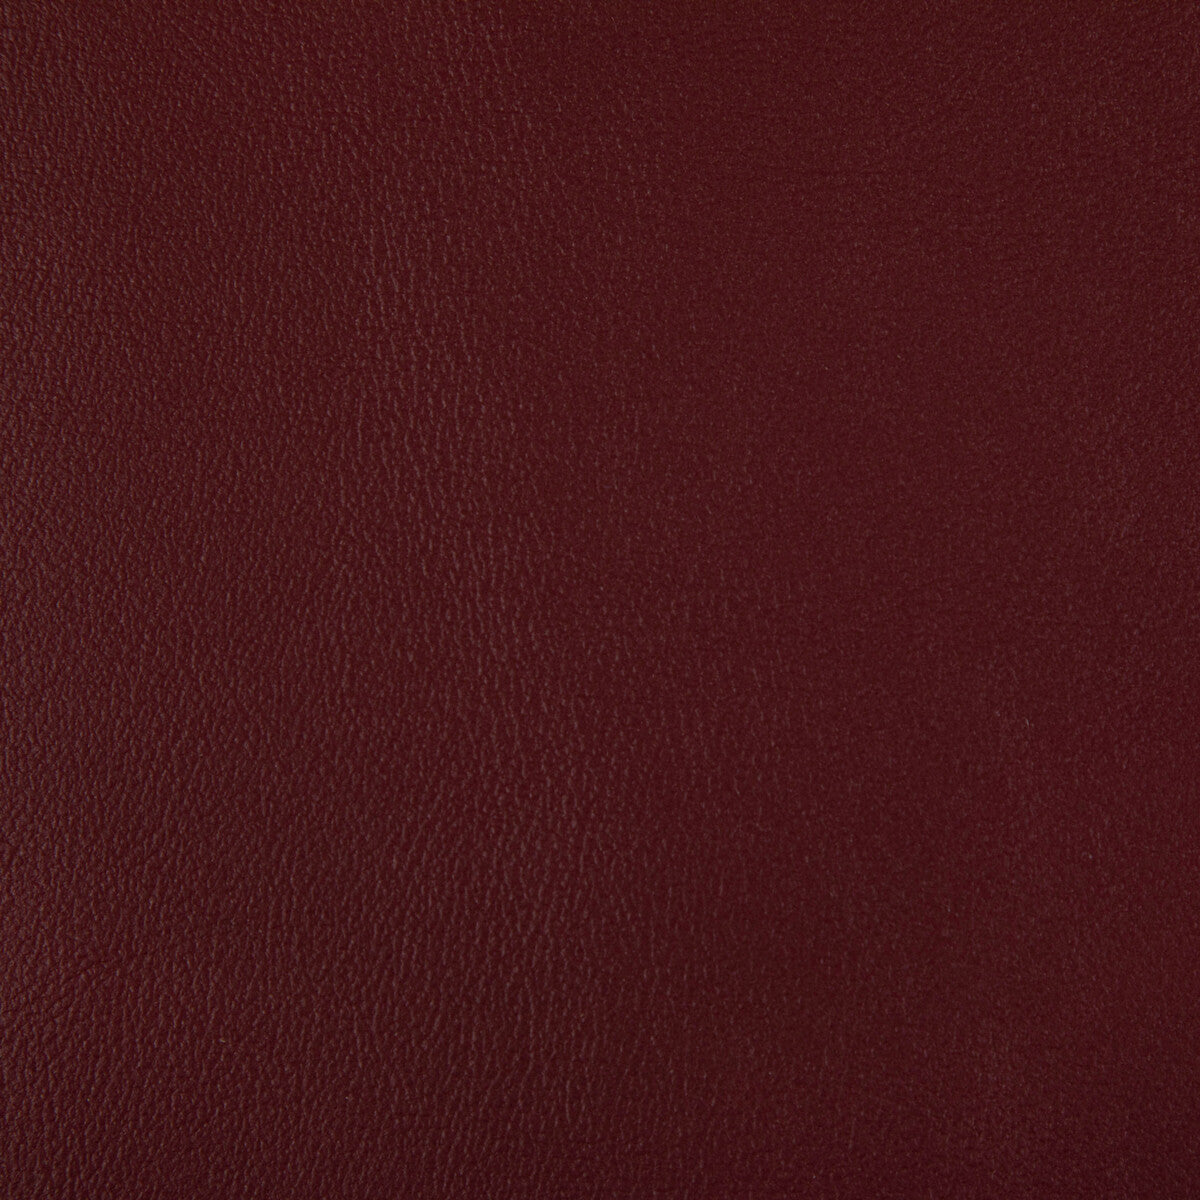 Rand fabric in sangria color - pattern RAND.9.0 - by Kravet Contract